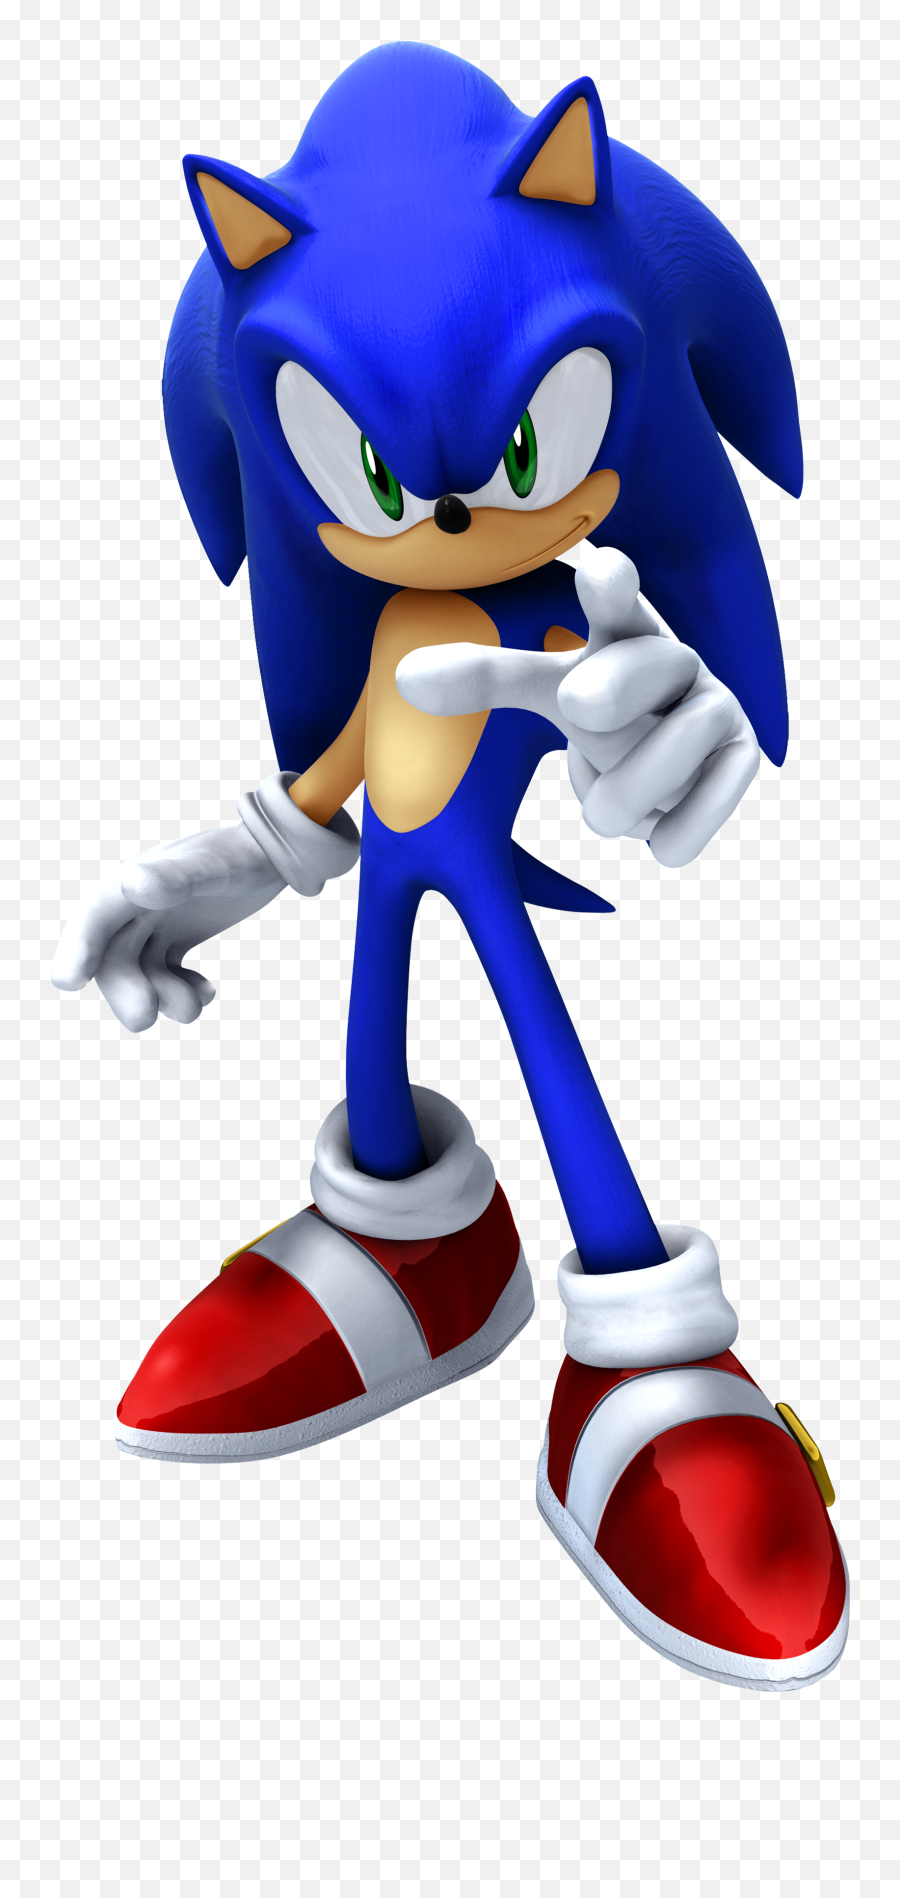 What Sonic Character Are You Most Like - Sonic 2006 Emoji,Sonic Emoji Copy And Paste